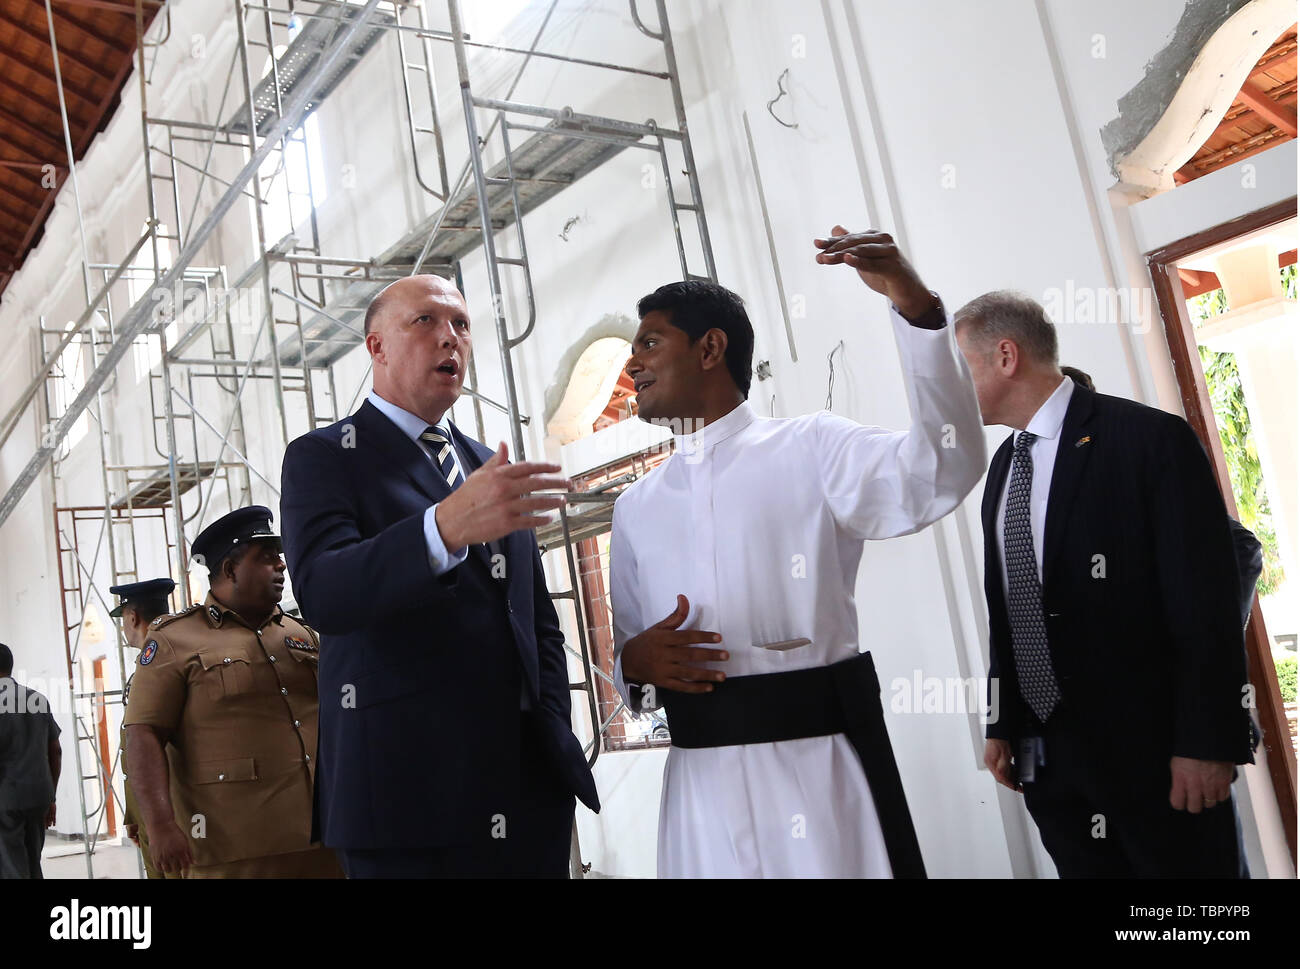 Negombo, Sri Lanka. 3rd June, 2019. Australian Minister of Home Affairs  Peter Dutton(L) and a priest Shameera Rodrigo(R) talk during his visit in  St.Sebastian's church Negombo, Sri Lanka June 3, 2019.Two Australian